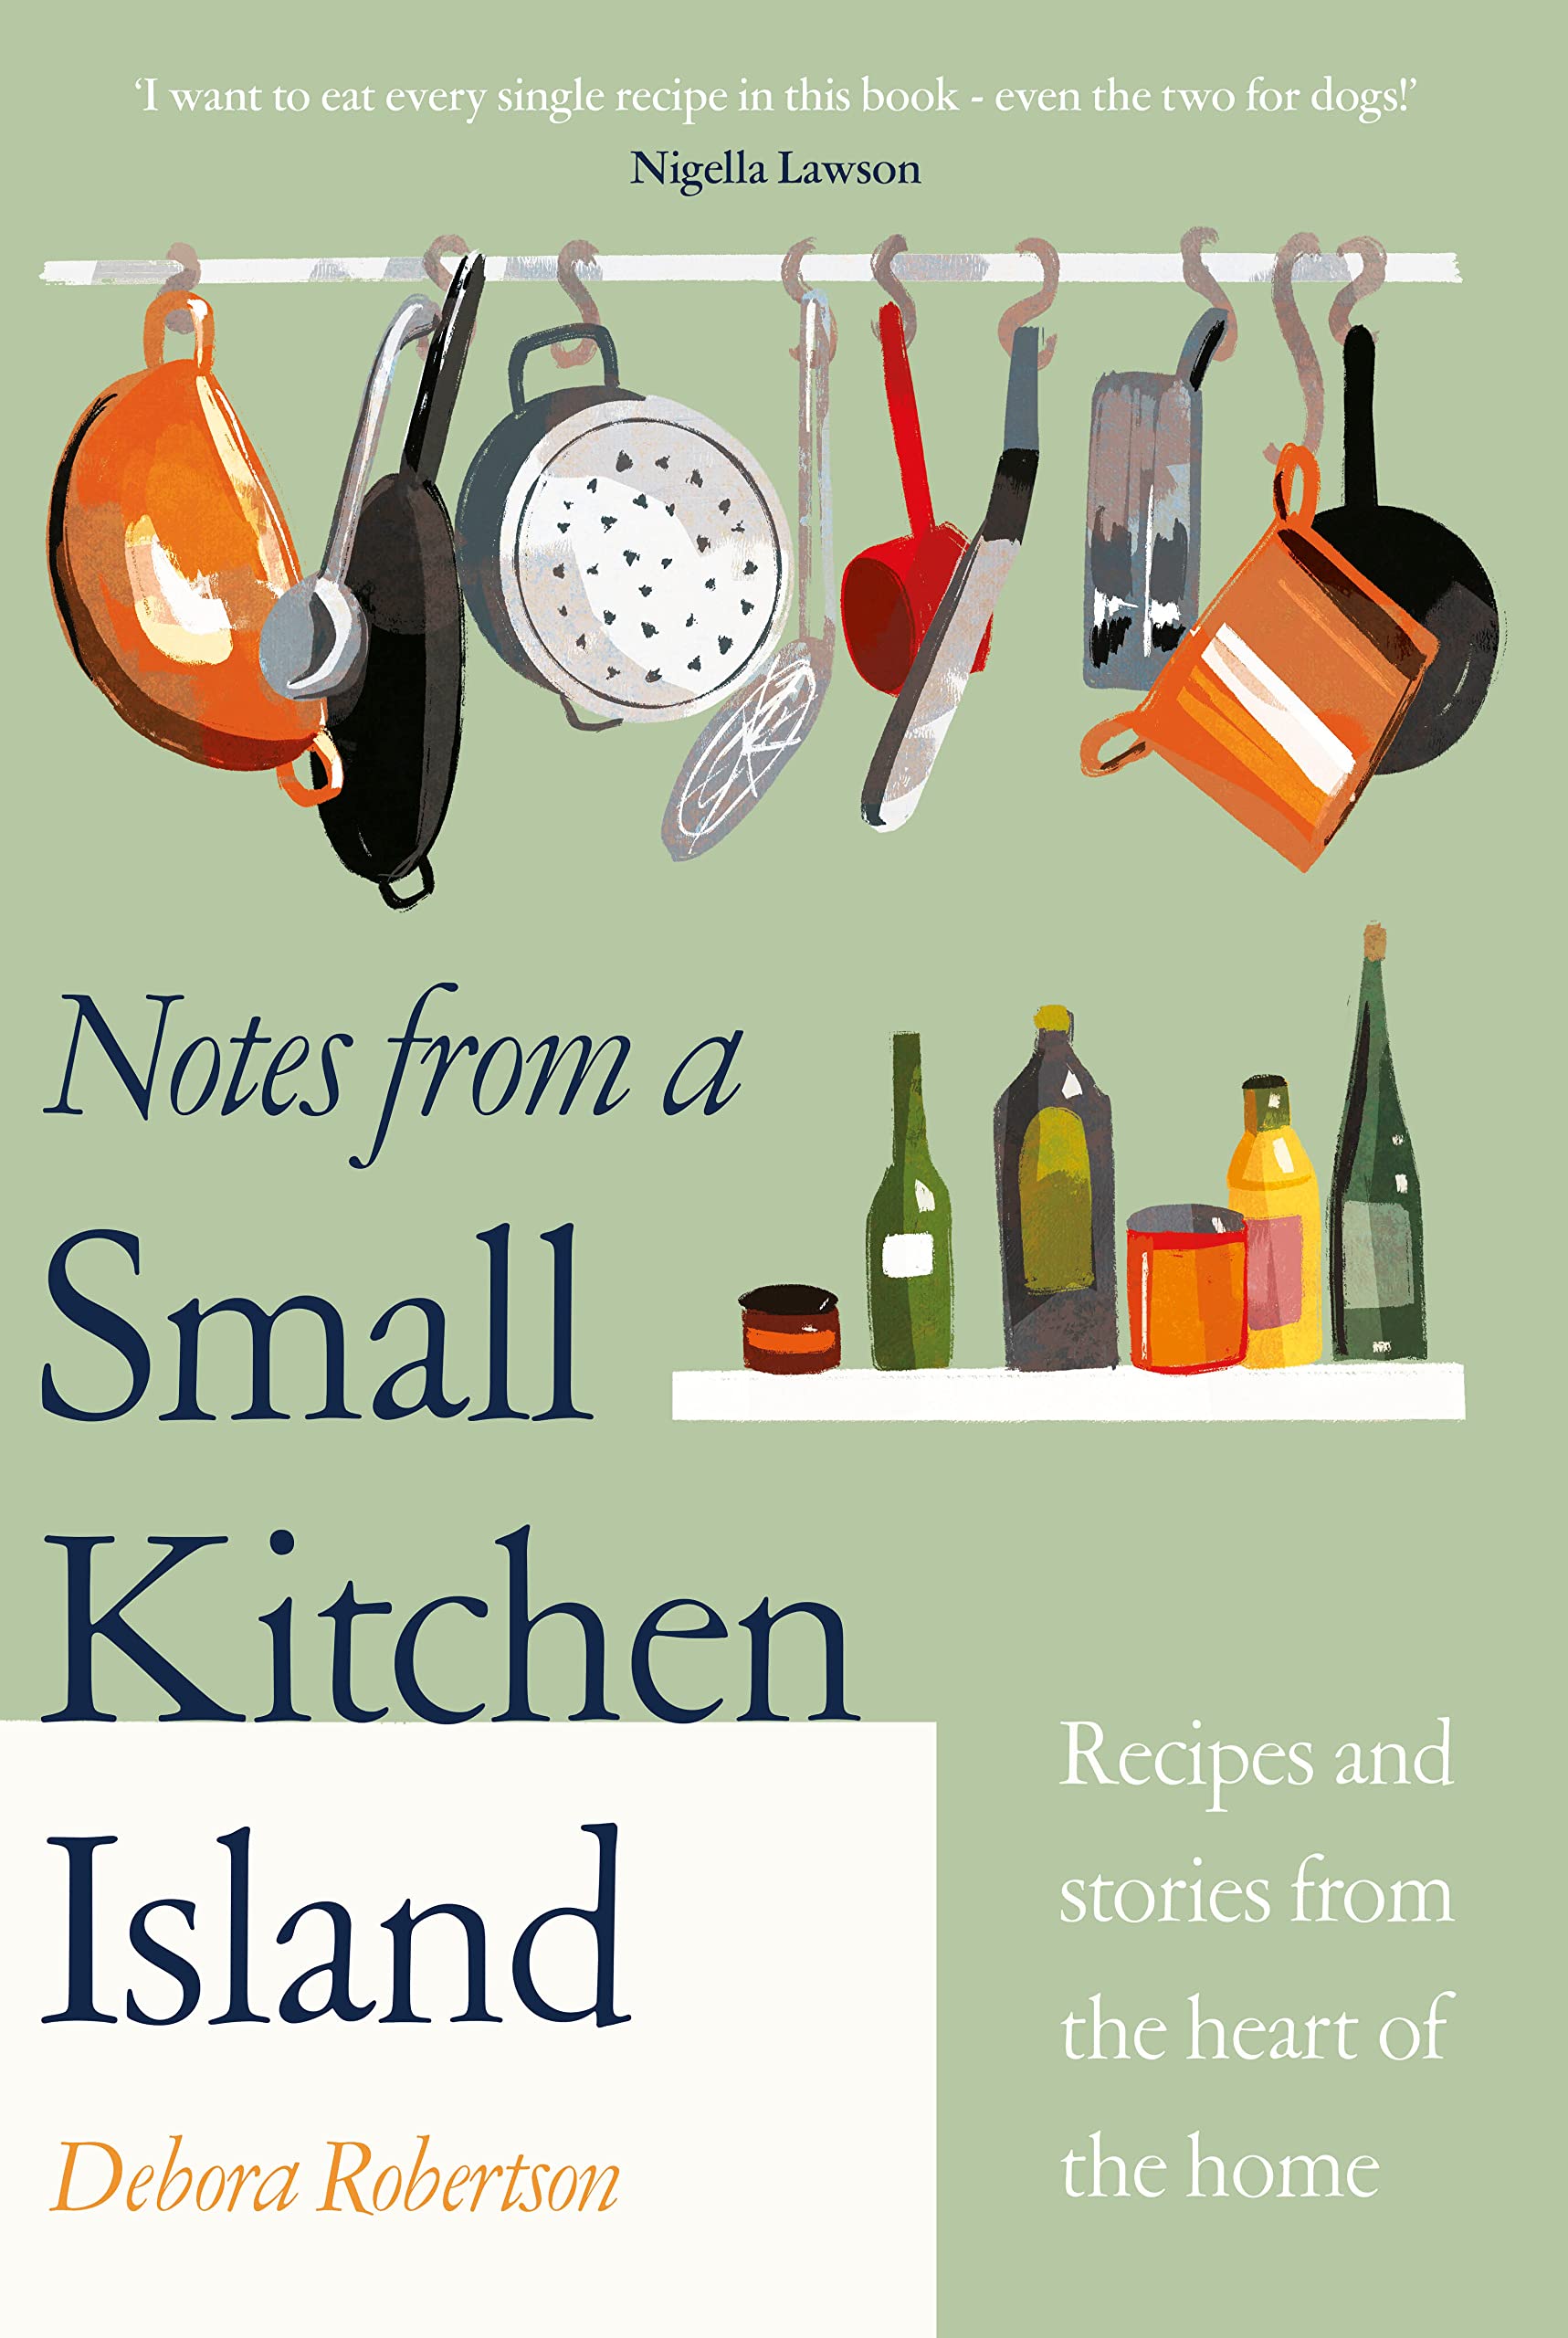 Notes From a Small Kitchen Island